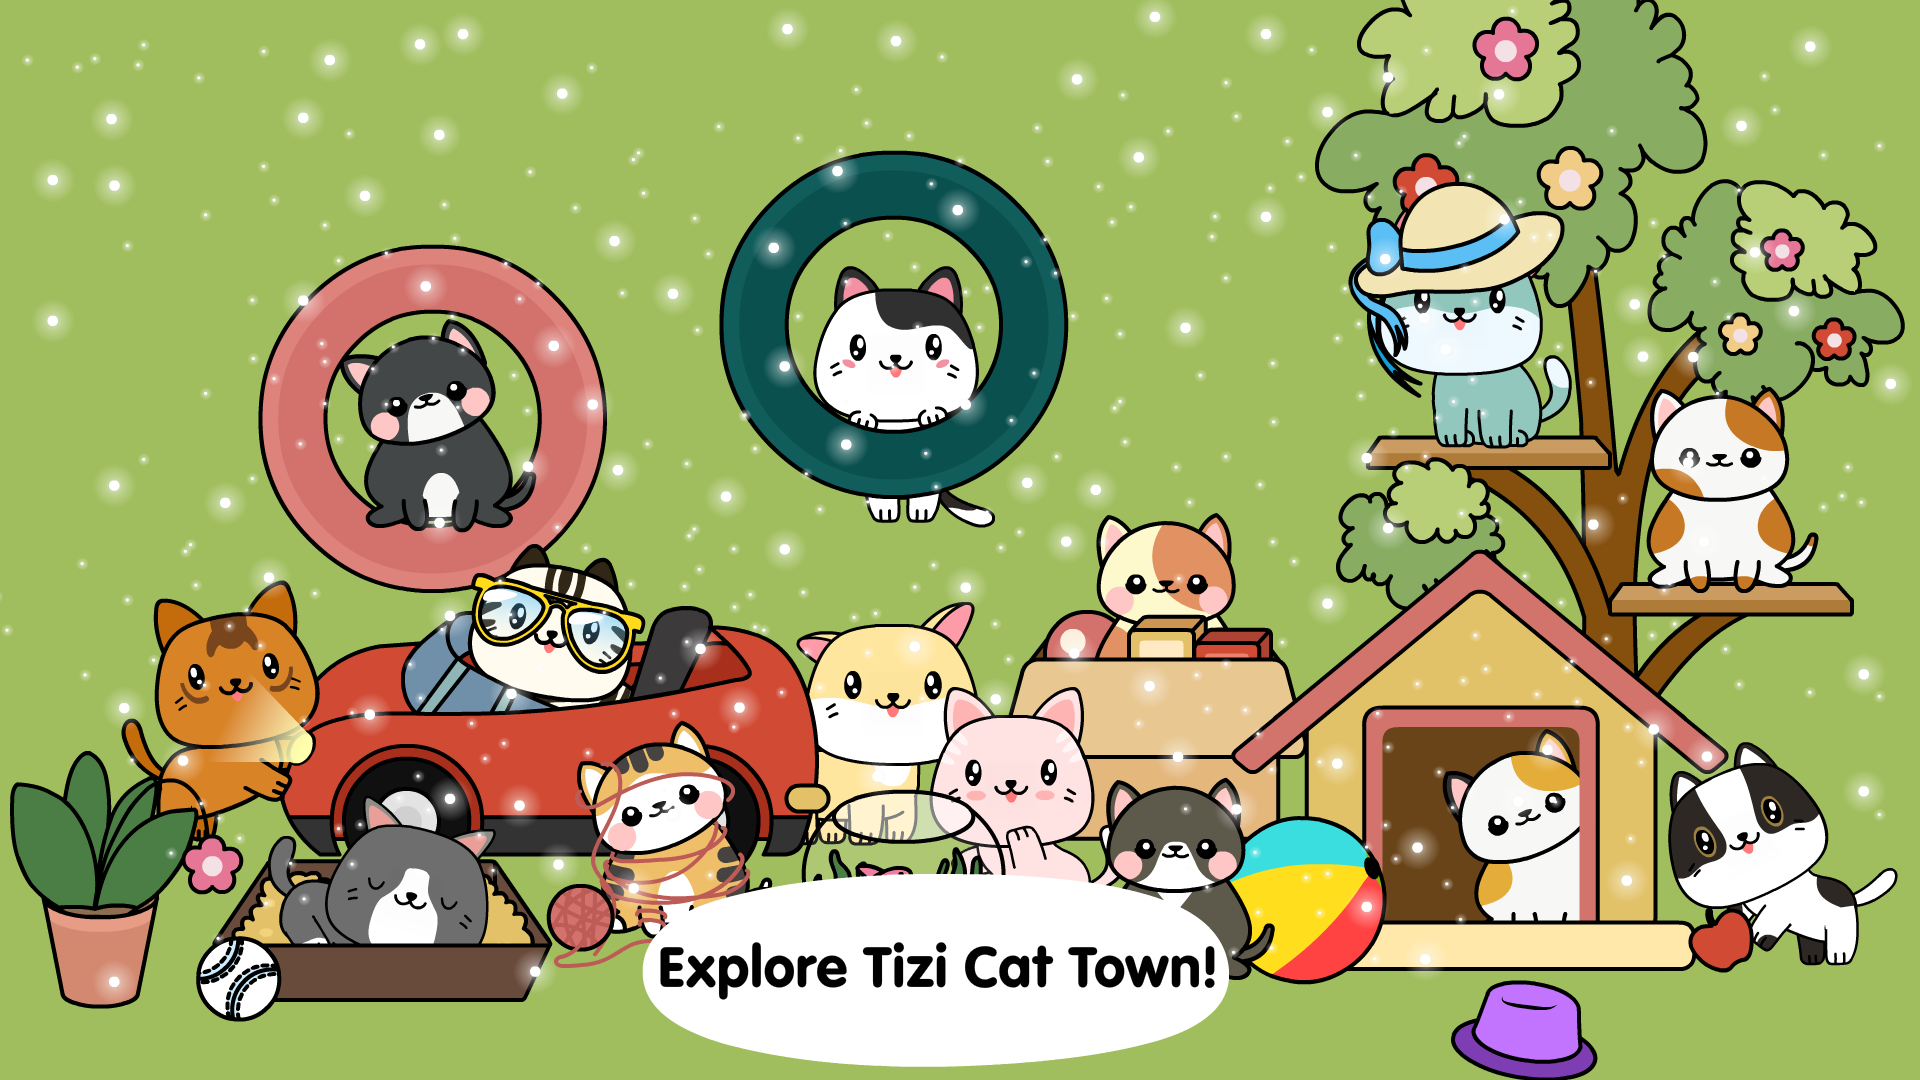 Screenshot 1 of Ma ville aux chats-d'Animaux 2.3.1